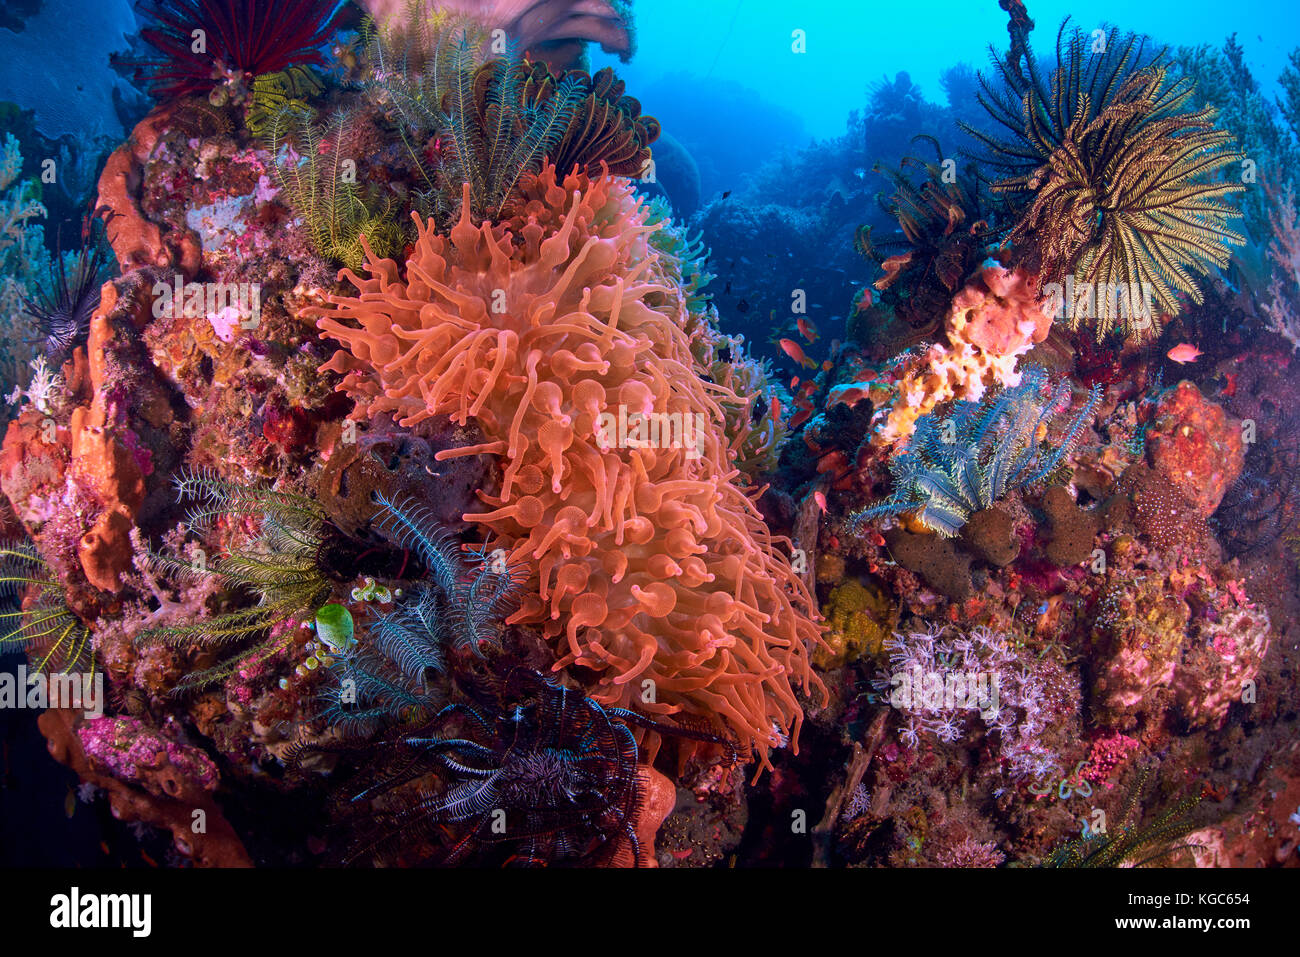 Biodiverse coral reef fed by nutrient rich waters from an active volcano - Komodo National Park, Indonesia. Stock Photo